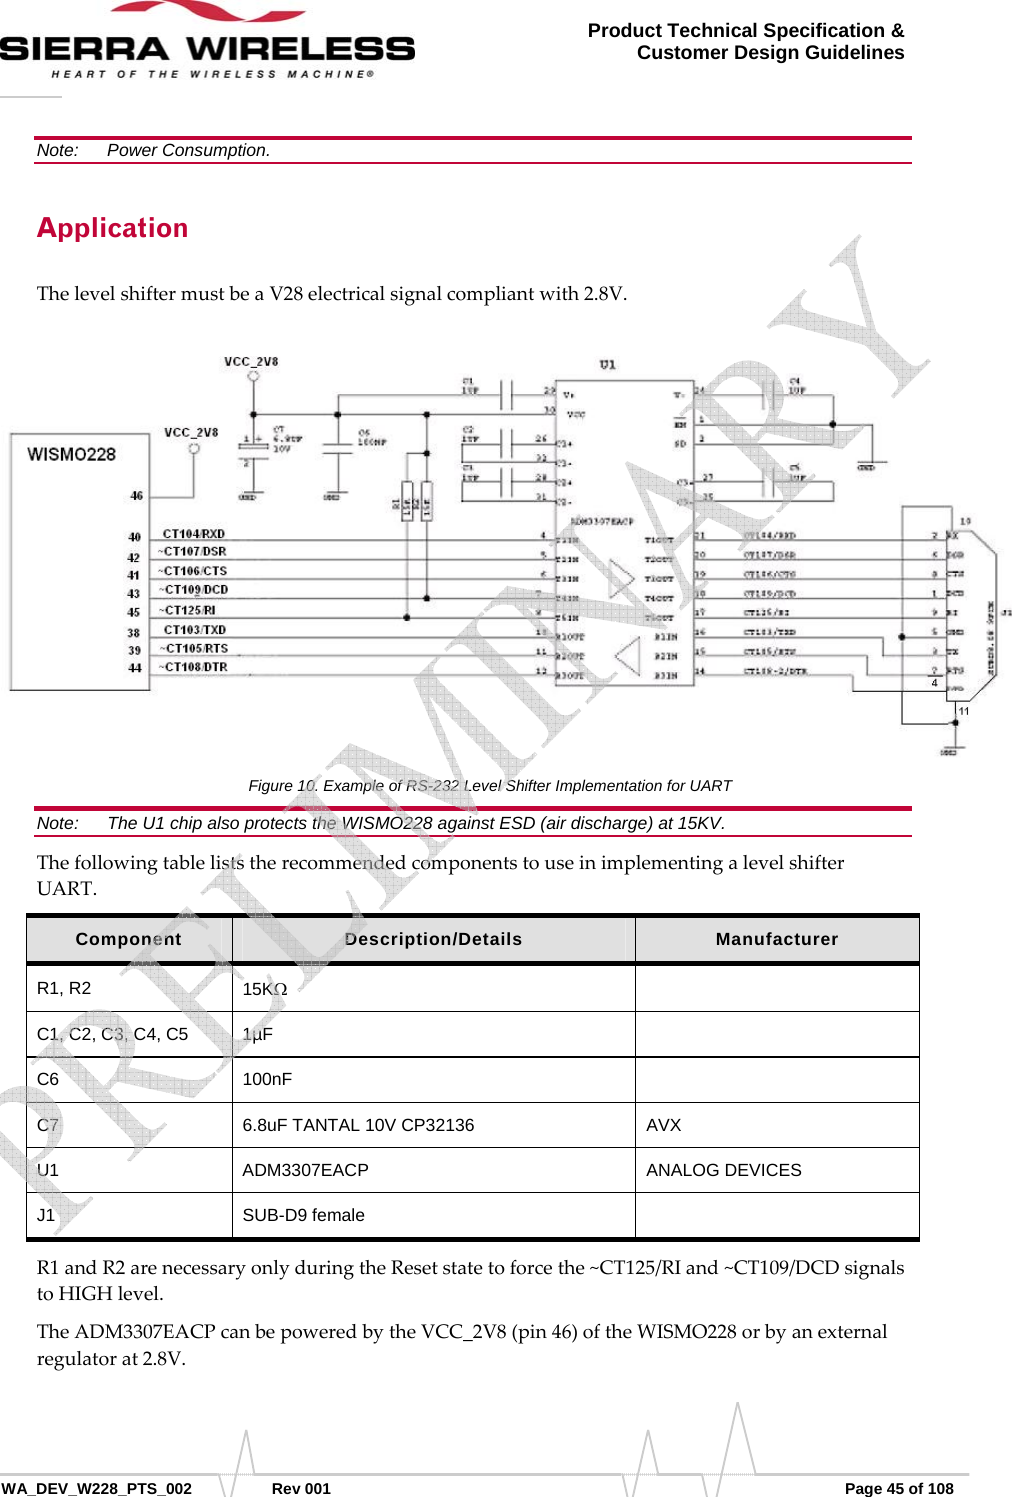      WA_DEV_W228_PTS_002 Rev 001  Page 45 of 108 Product Technical Specification &amp; Customer Design Guidelines Note:   Power Consumption. Application ThelevelshiftermustbeaV28electricalsignalcompliantwith2.8V.Figure 10. Example of RS-232 Level Shifter Implementation for UART Note:   The U1 chip also protects the WISMO228 against ESD (air discharge) at 15KV. ThefollowingtableliststherecommendedcomponentstouseinimplementingalevelshifterUART.Component  Description/Details  Manufacturer R1, R2  15KΩ  C1, C2, C3, C4, C5  1µF   C6 100nF   C7 6.8uF TANTAL 10V CP32136 AVX U1 ADM3307EACP  ANALOG DEVICES J1 SUB-D9 female   R1andR2arenecessaryonlyduringtheResetstatetoforcethe~CT125/RIand~CT109/DCDsignalstoHIGHlevel.TheADM3307EACPcanbepoweredbytheVCC_2V8(pin46)oftheWISMO228orbyanexternalregulatorat2.8V.   